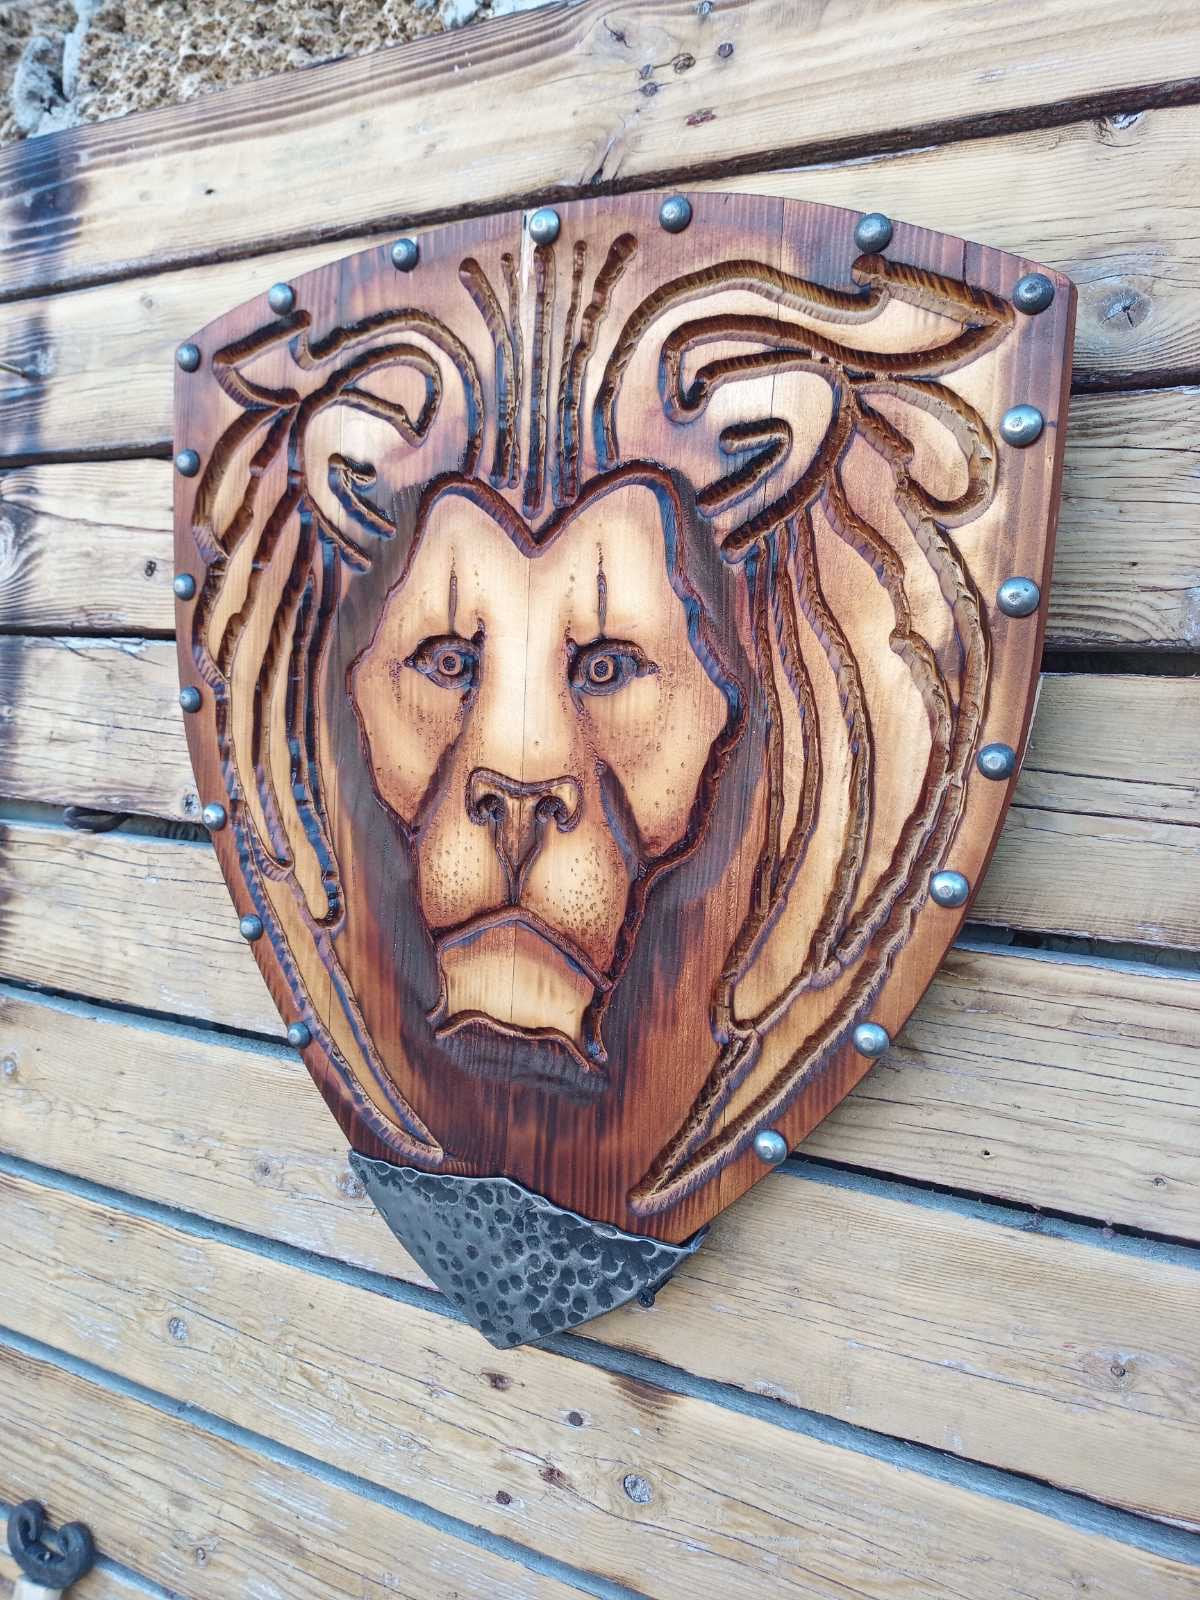 Decorative shield, shield, viking shield, cosplay shield, mens gift, viking gift, medieval decor, viking theme, gift for men, wooden gift